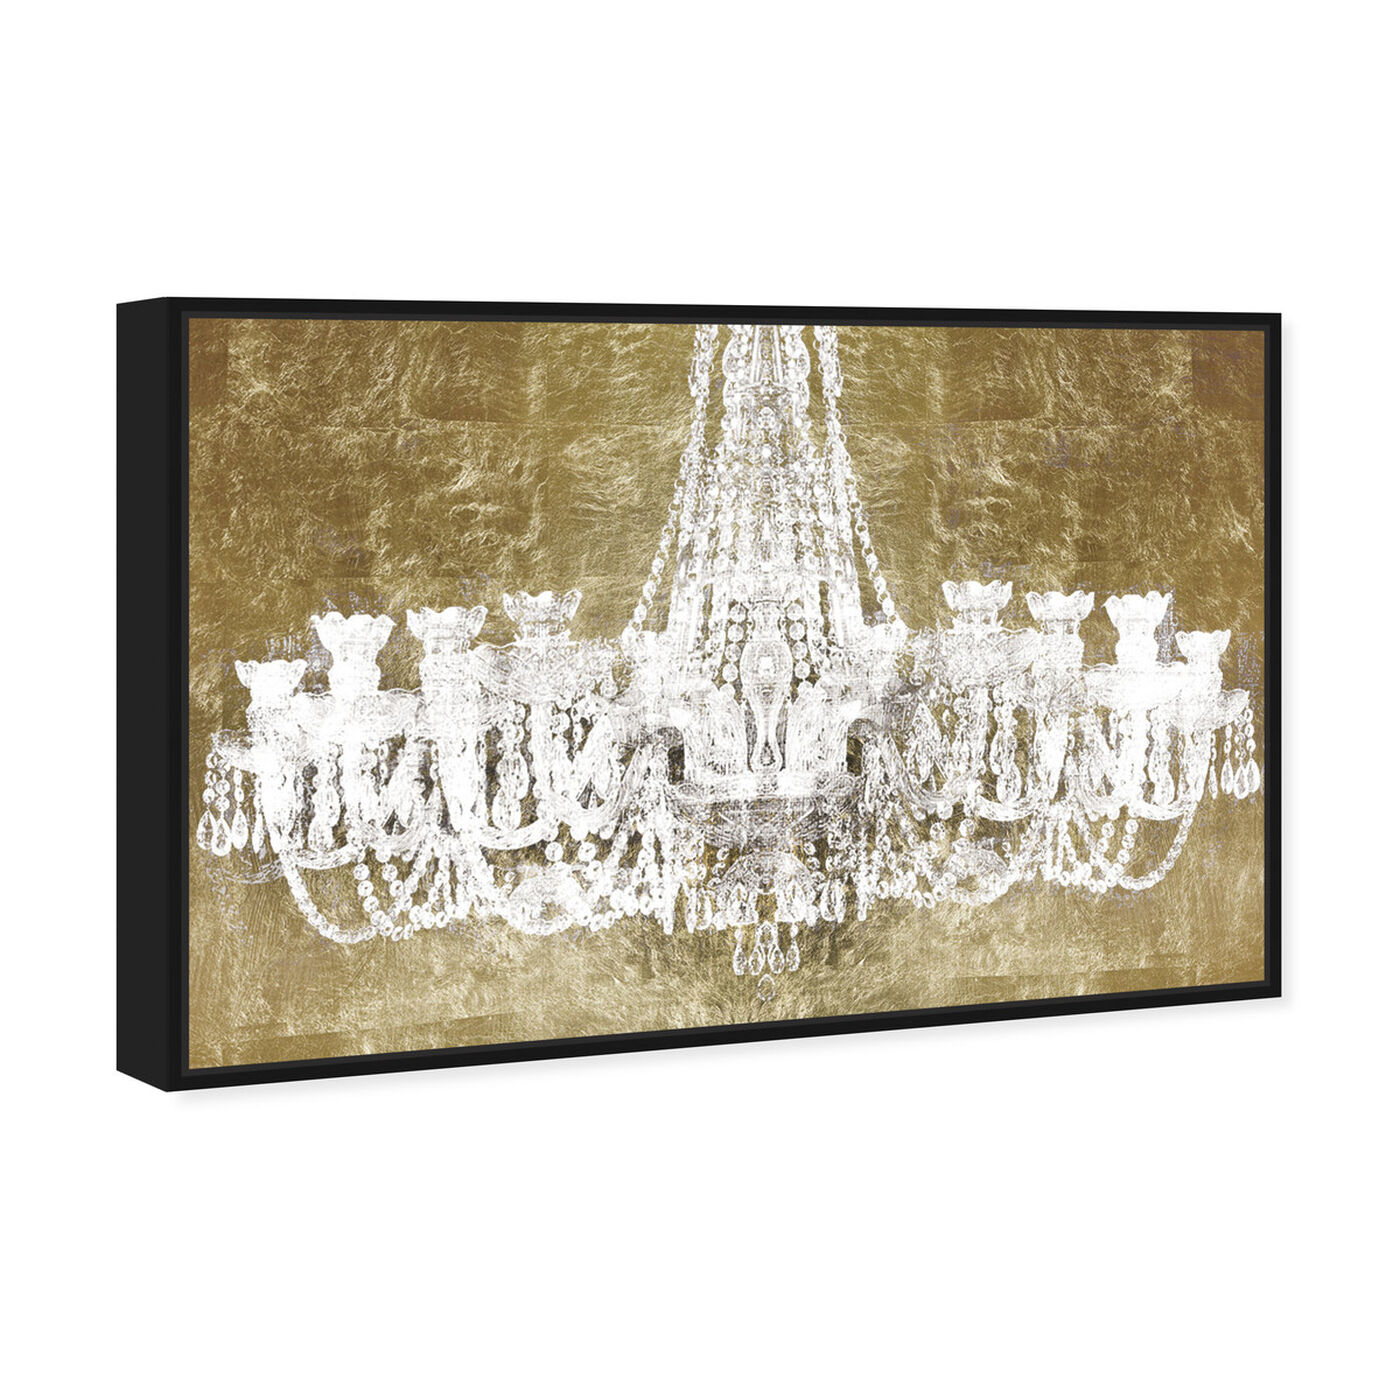 Angled view of Shine Bright Like A Diamond featuring fashion and glam and chandeliers art.